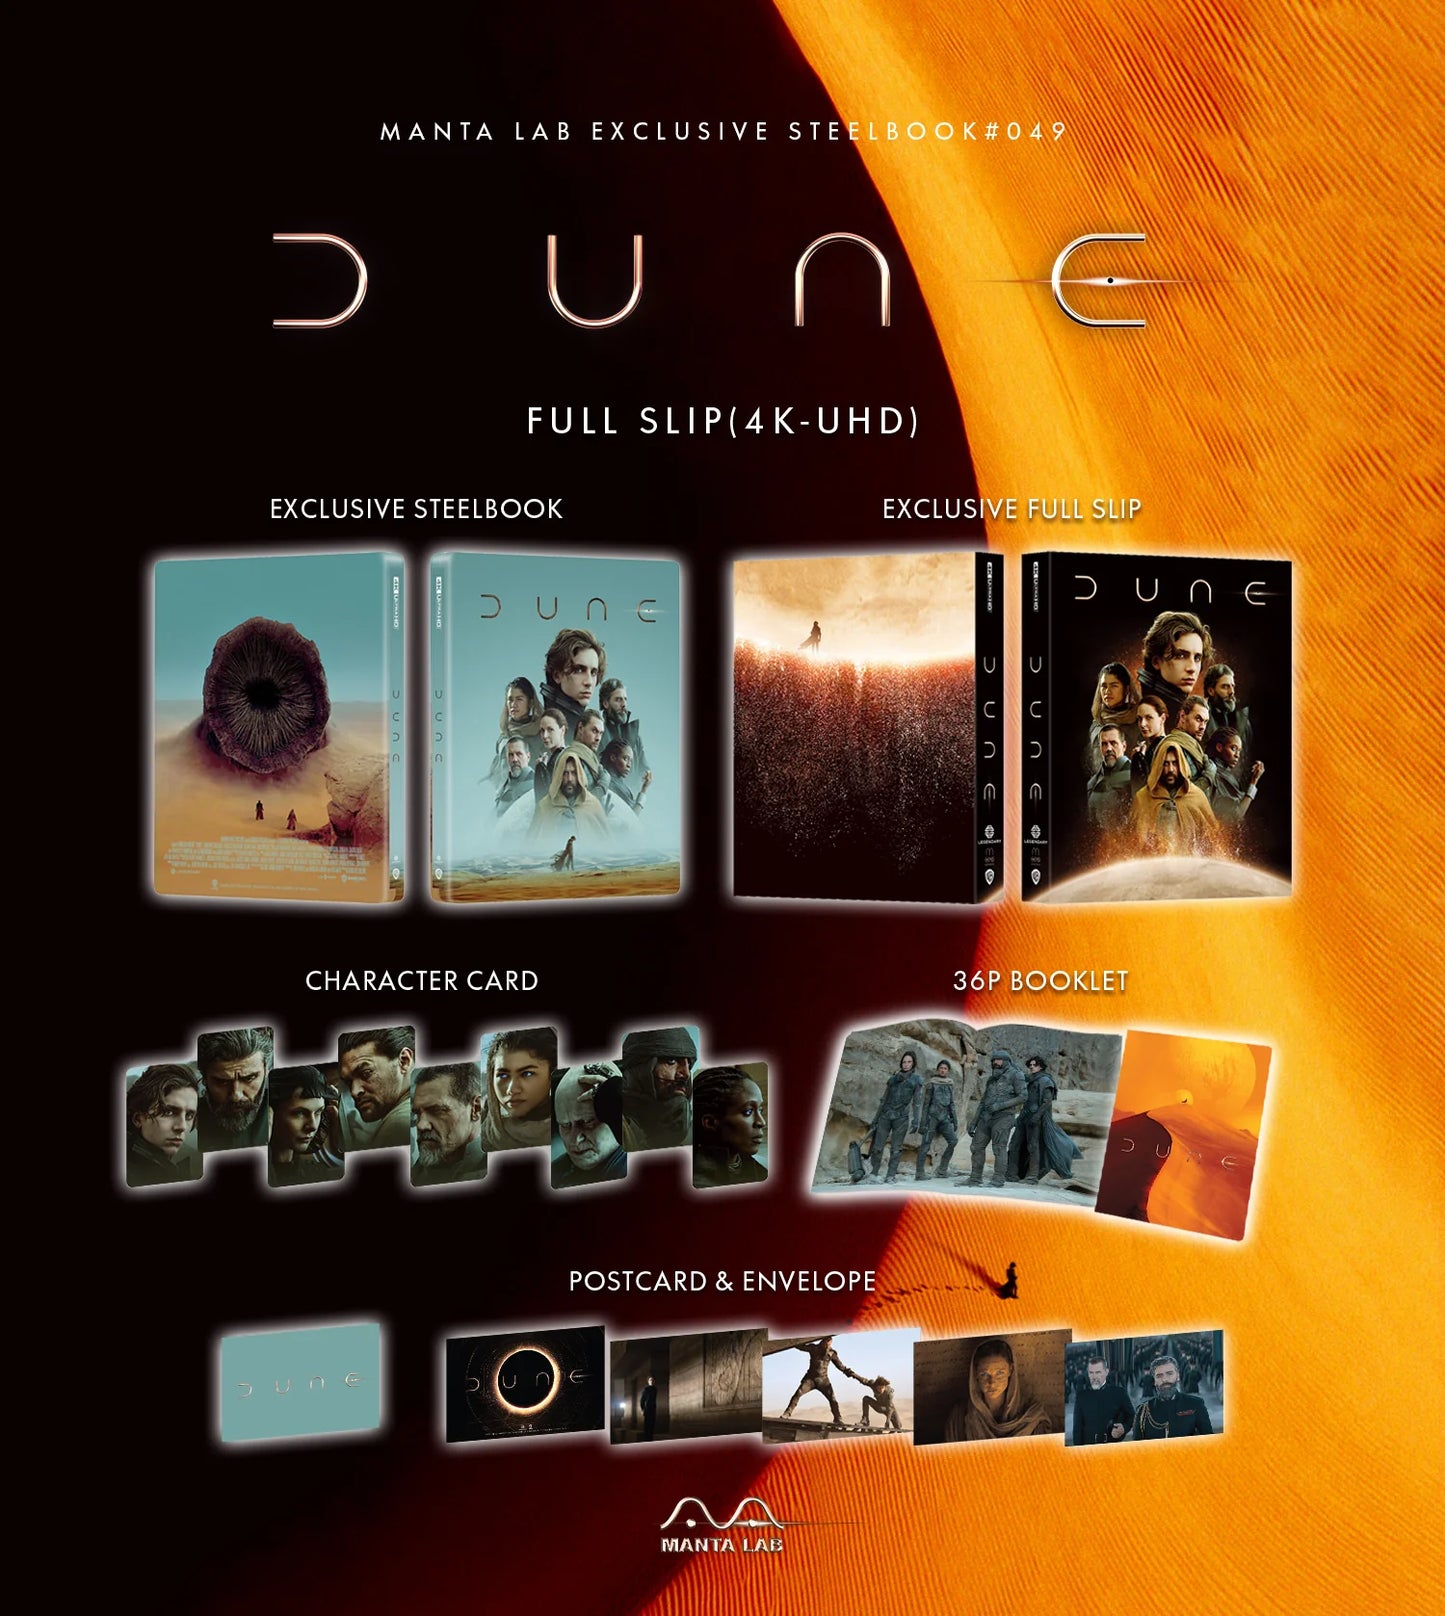 Dune 4K Blu-ray Steelbook Collectong Manta Lab Exclusive ME#49 One Click Box Set